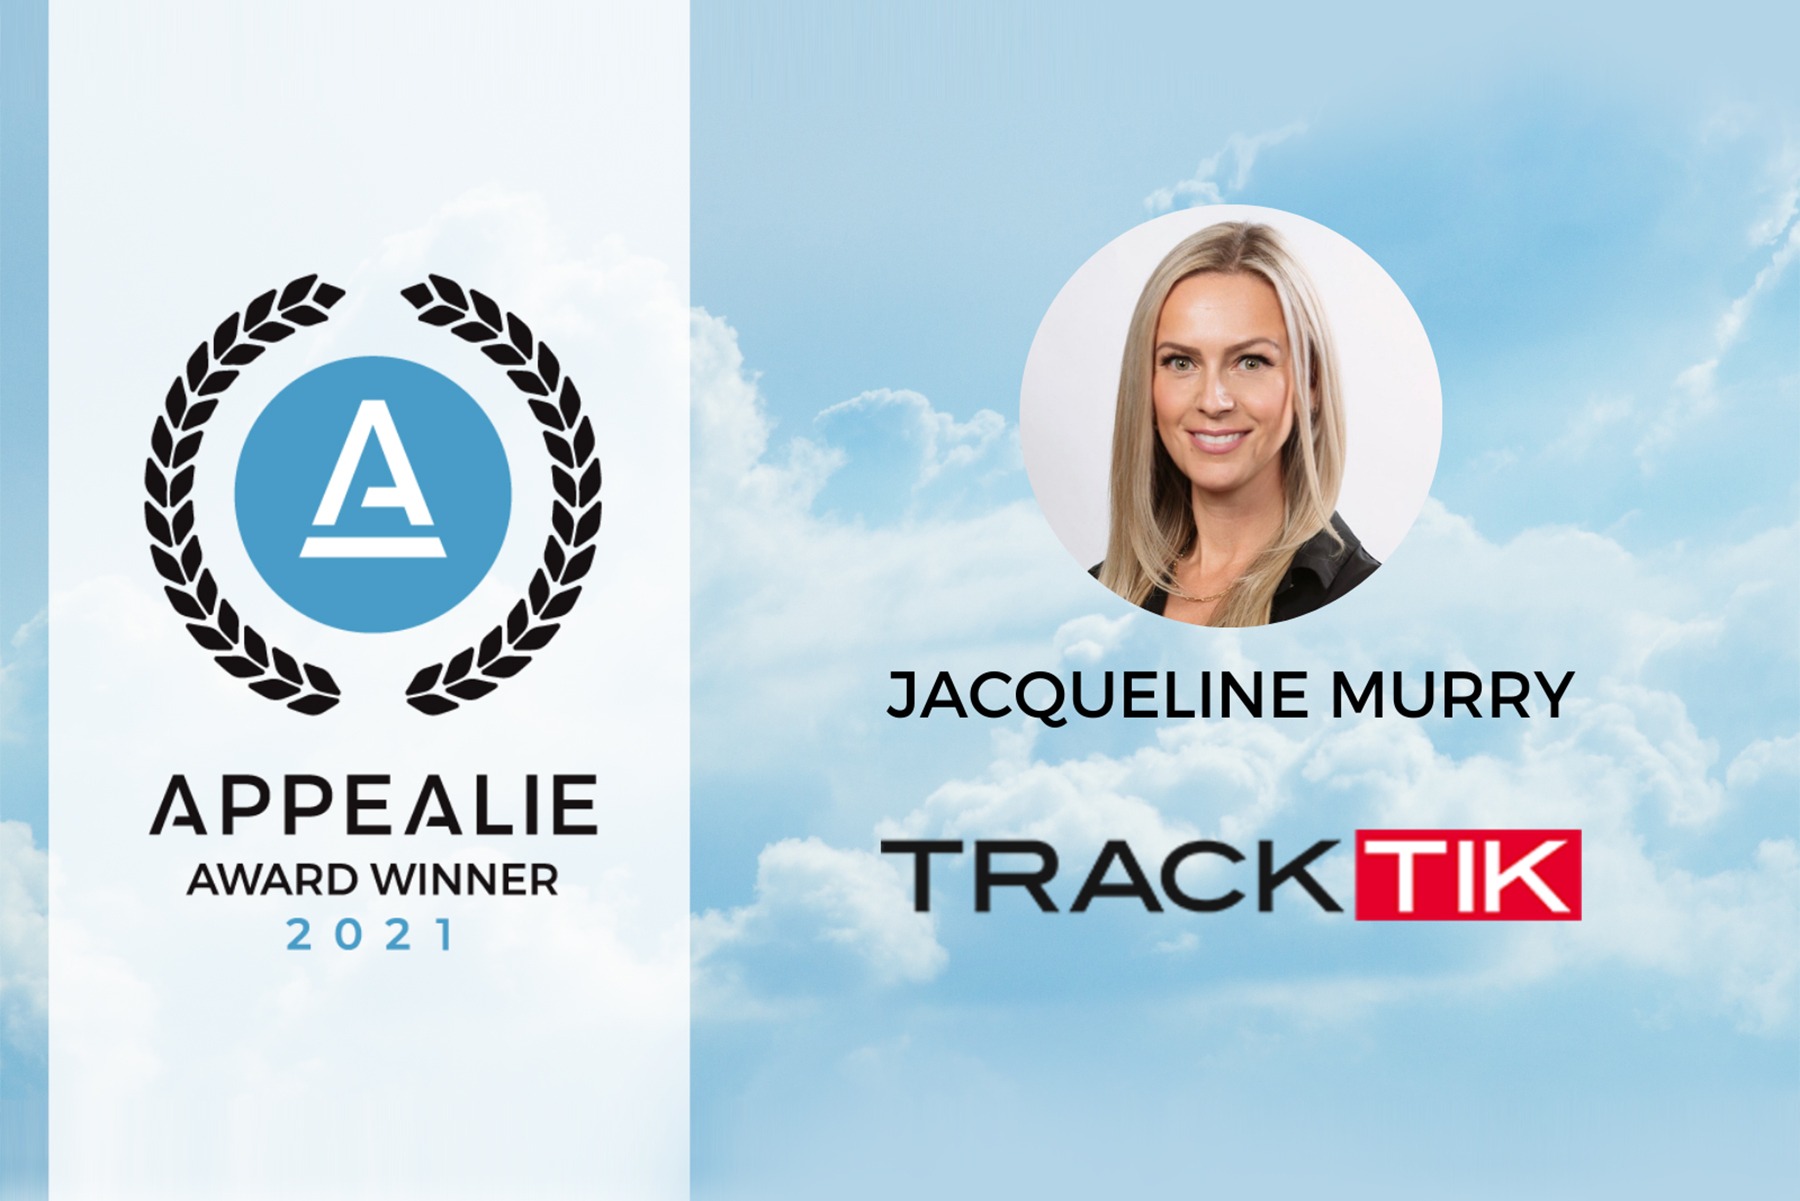 2021 SaaS Customer Success Leader Awards Announced –  APPEALIE Honors Jacqueline Murry for her Track Record of Achieving Goals, Leadership Skills, and Ability to Attract and Retain Talent